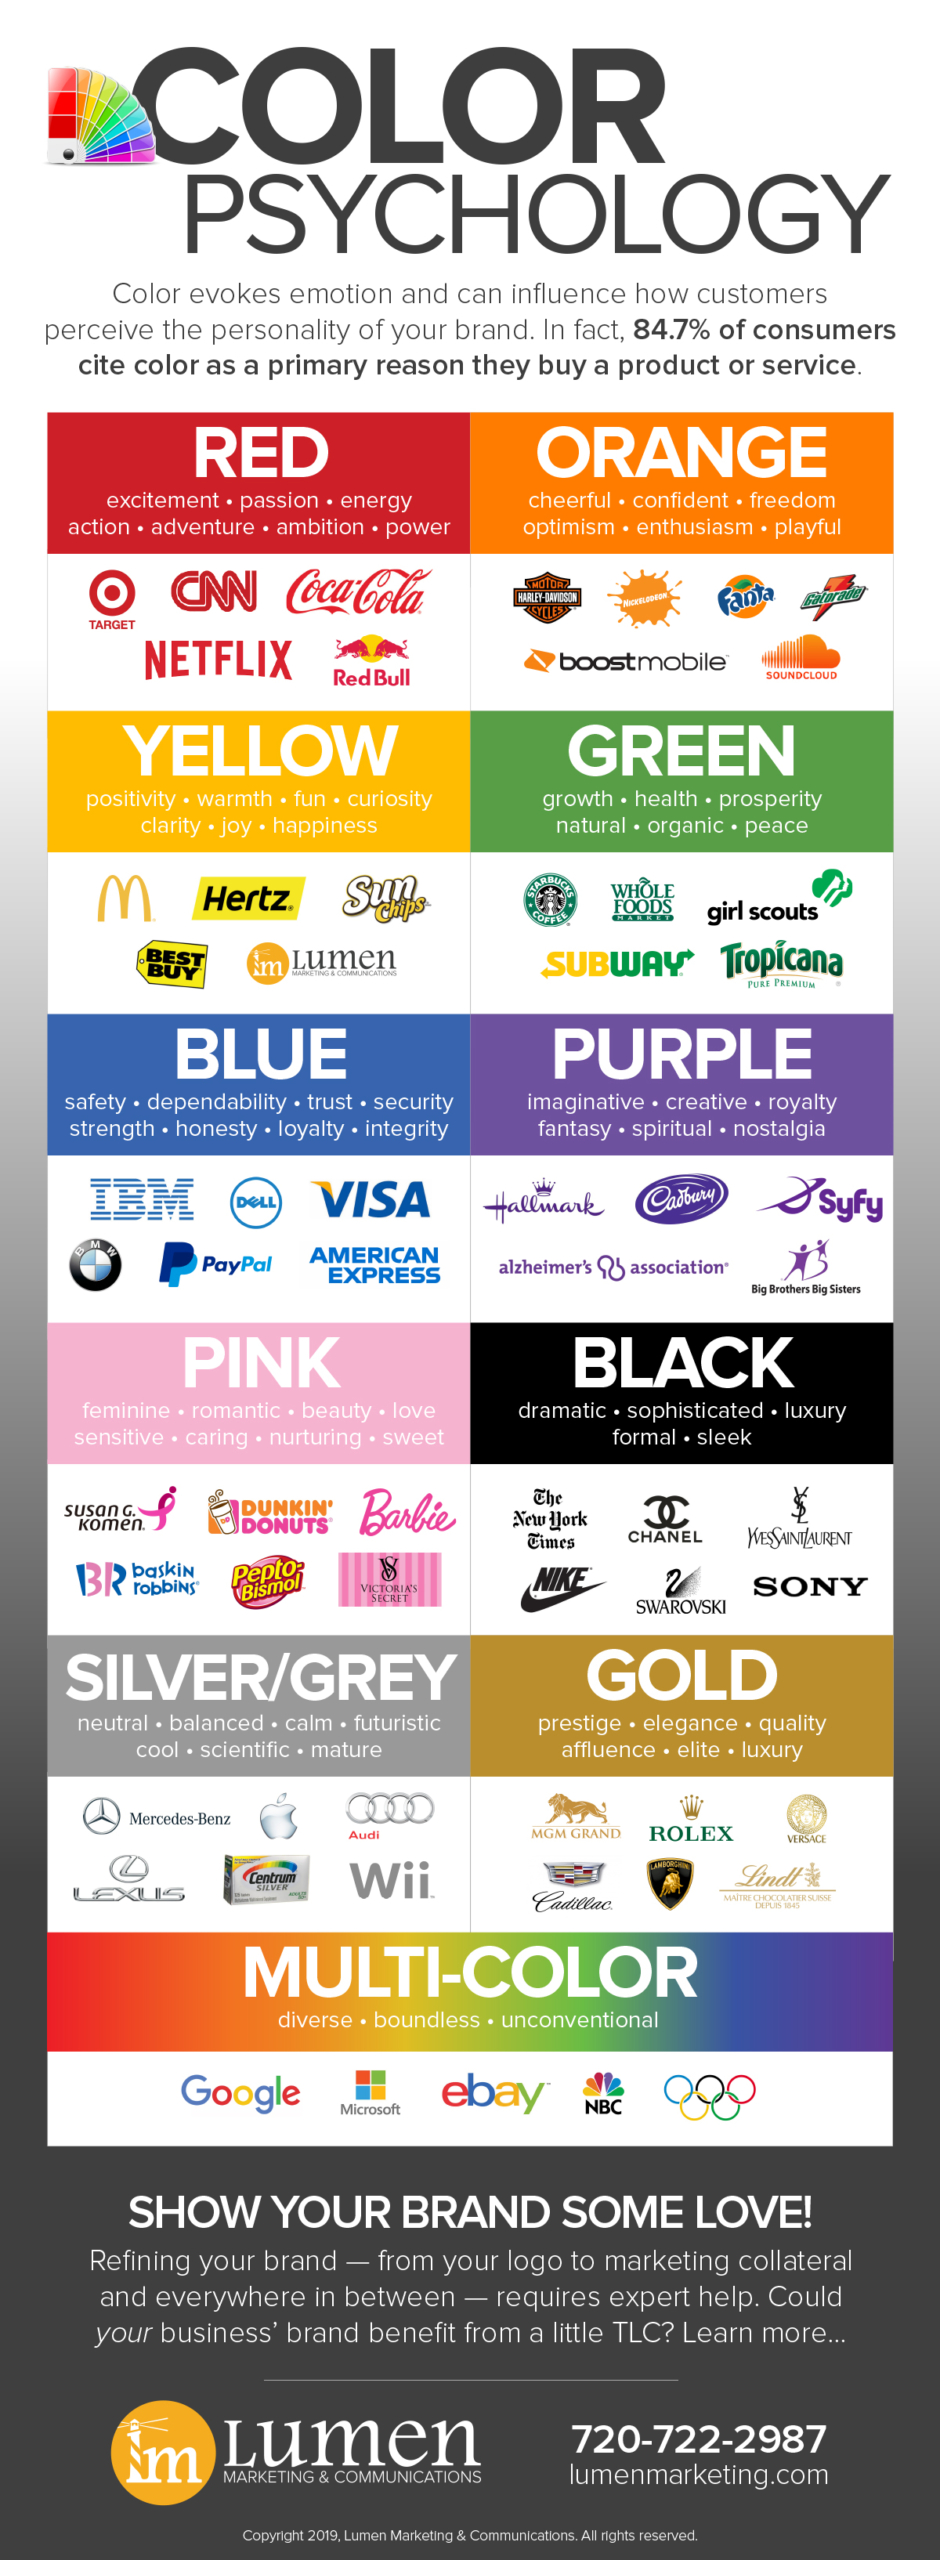 color psychology color theory infographic - Copyright 2019, Lumen Marketing & Communications. All rights reserved.